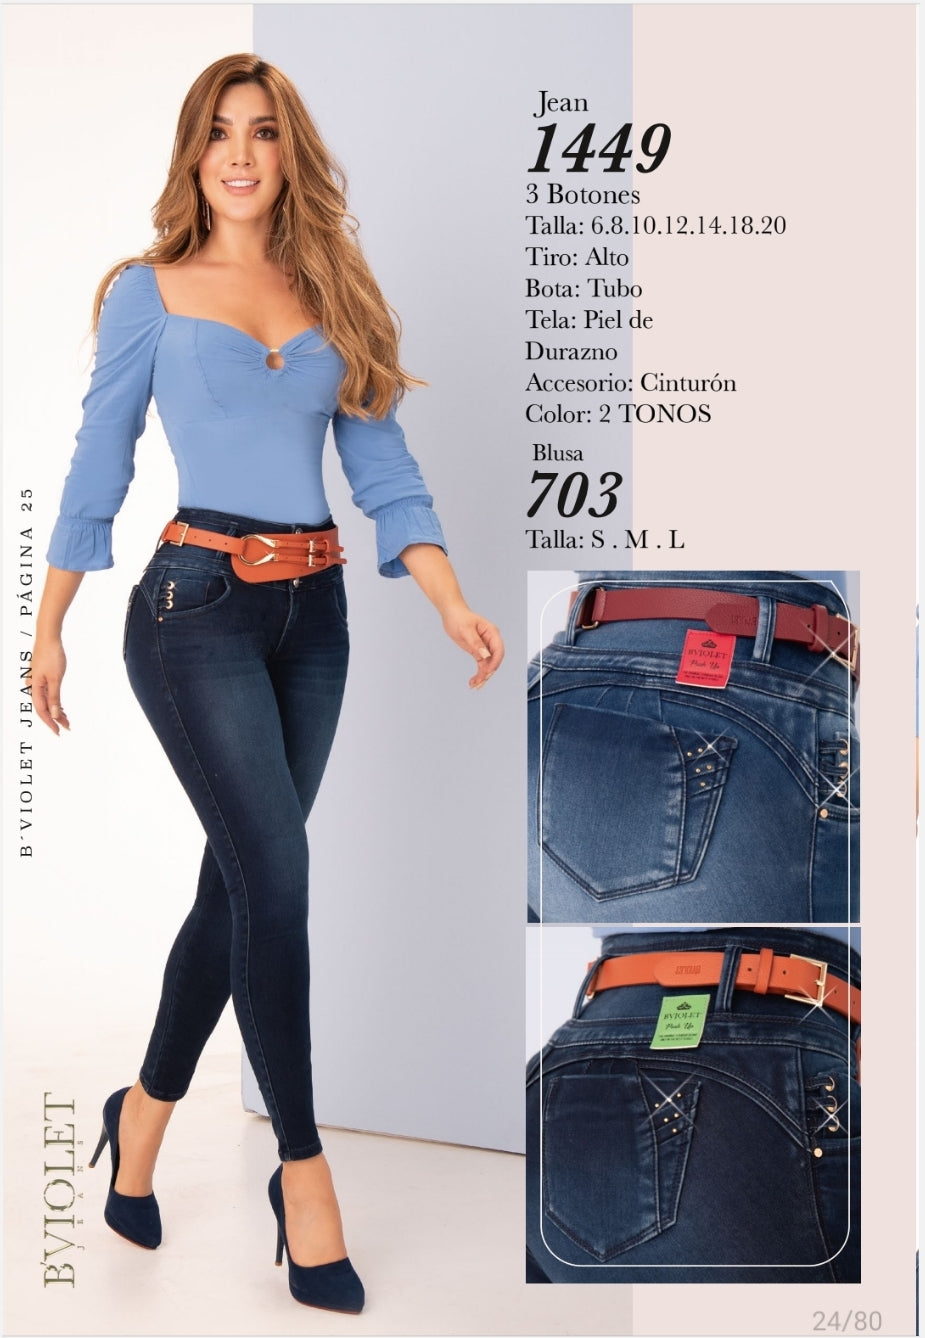 PUSH UP JEANS BY B' VIOLET – Tammy's High Fashion